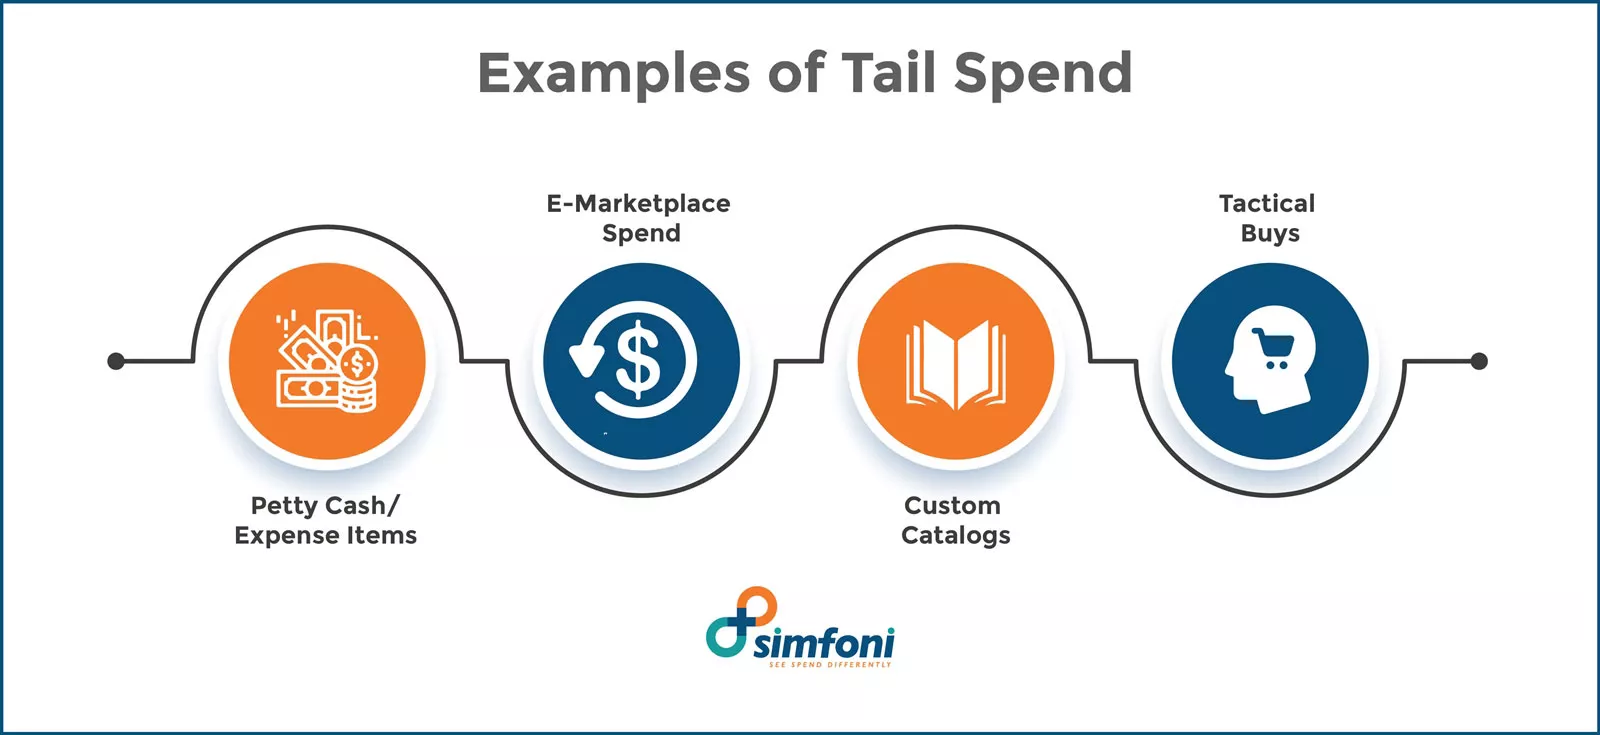 Examples of Tail Spend